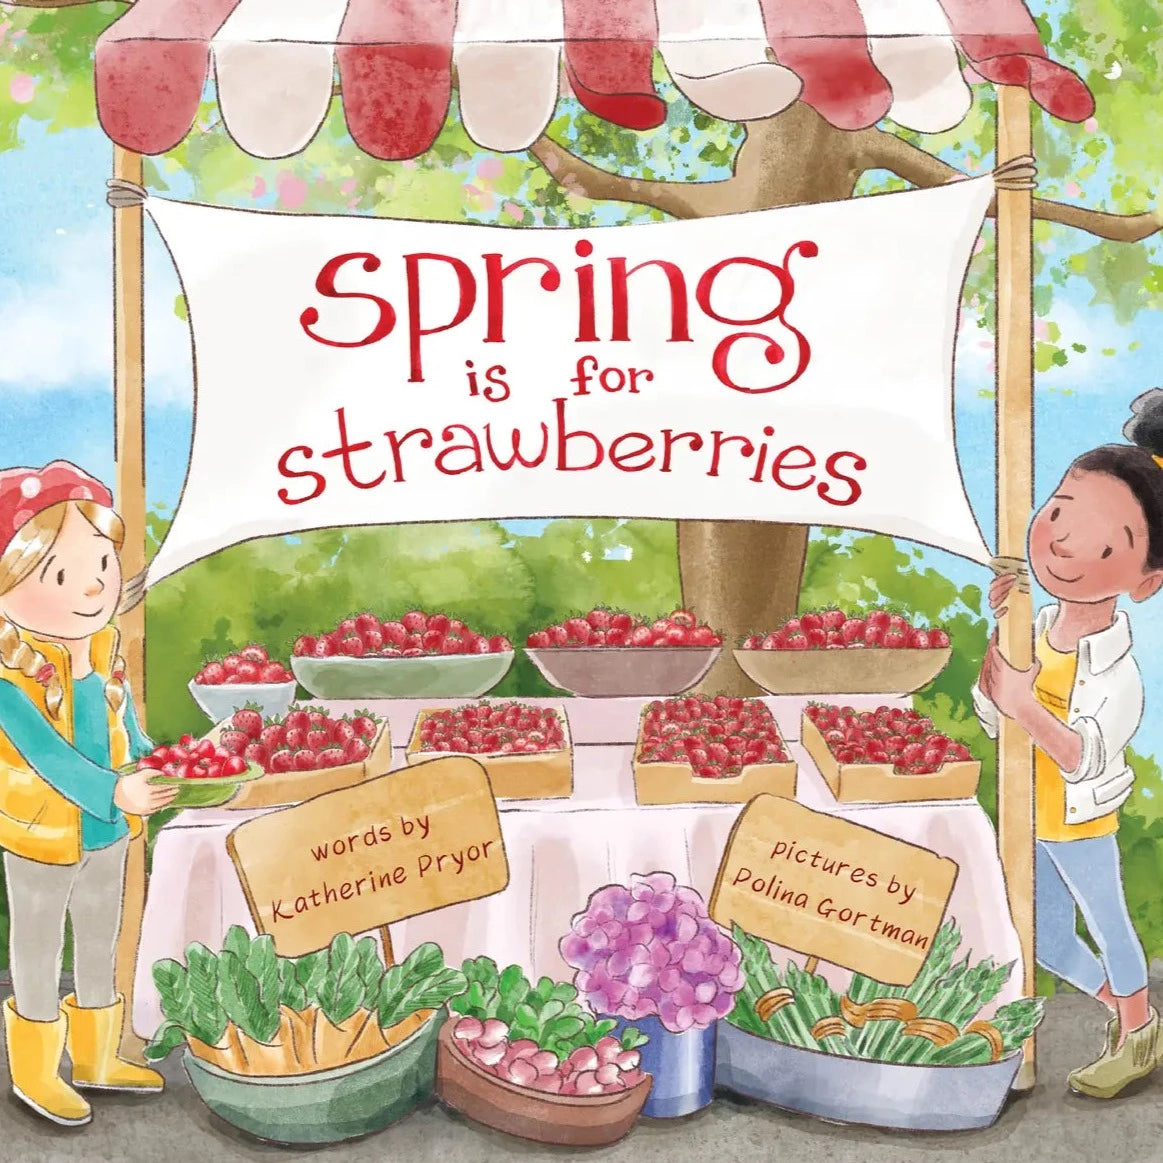 Spring is for Strawberries